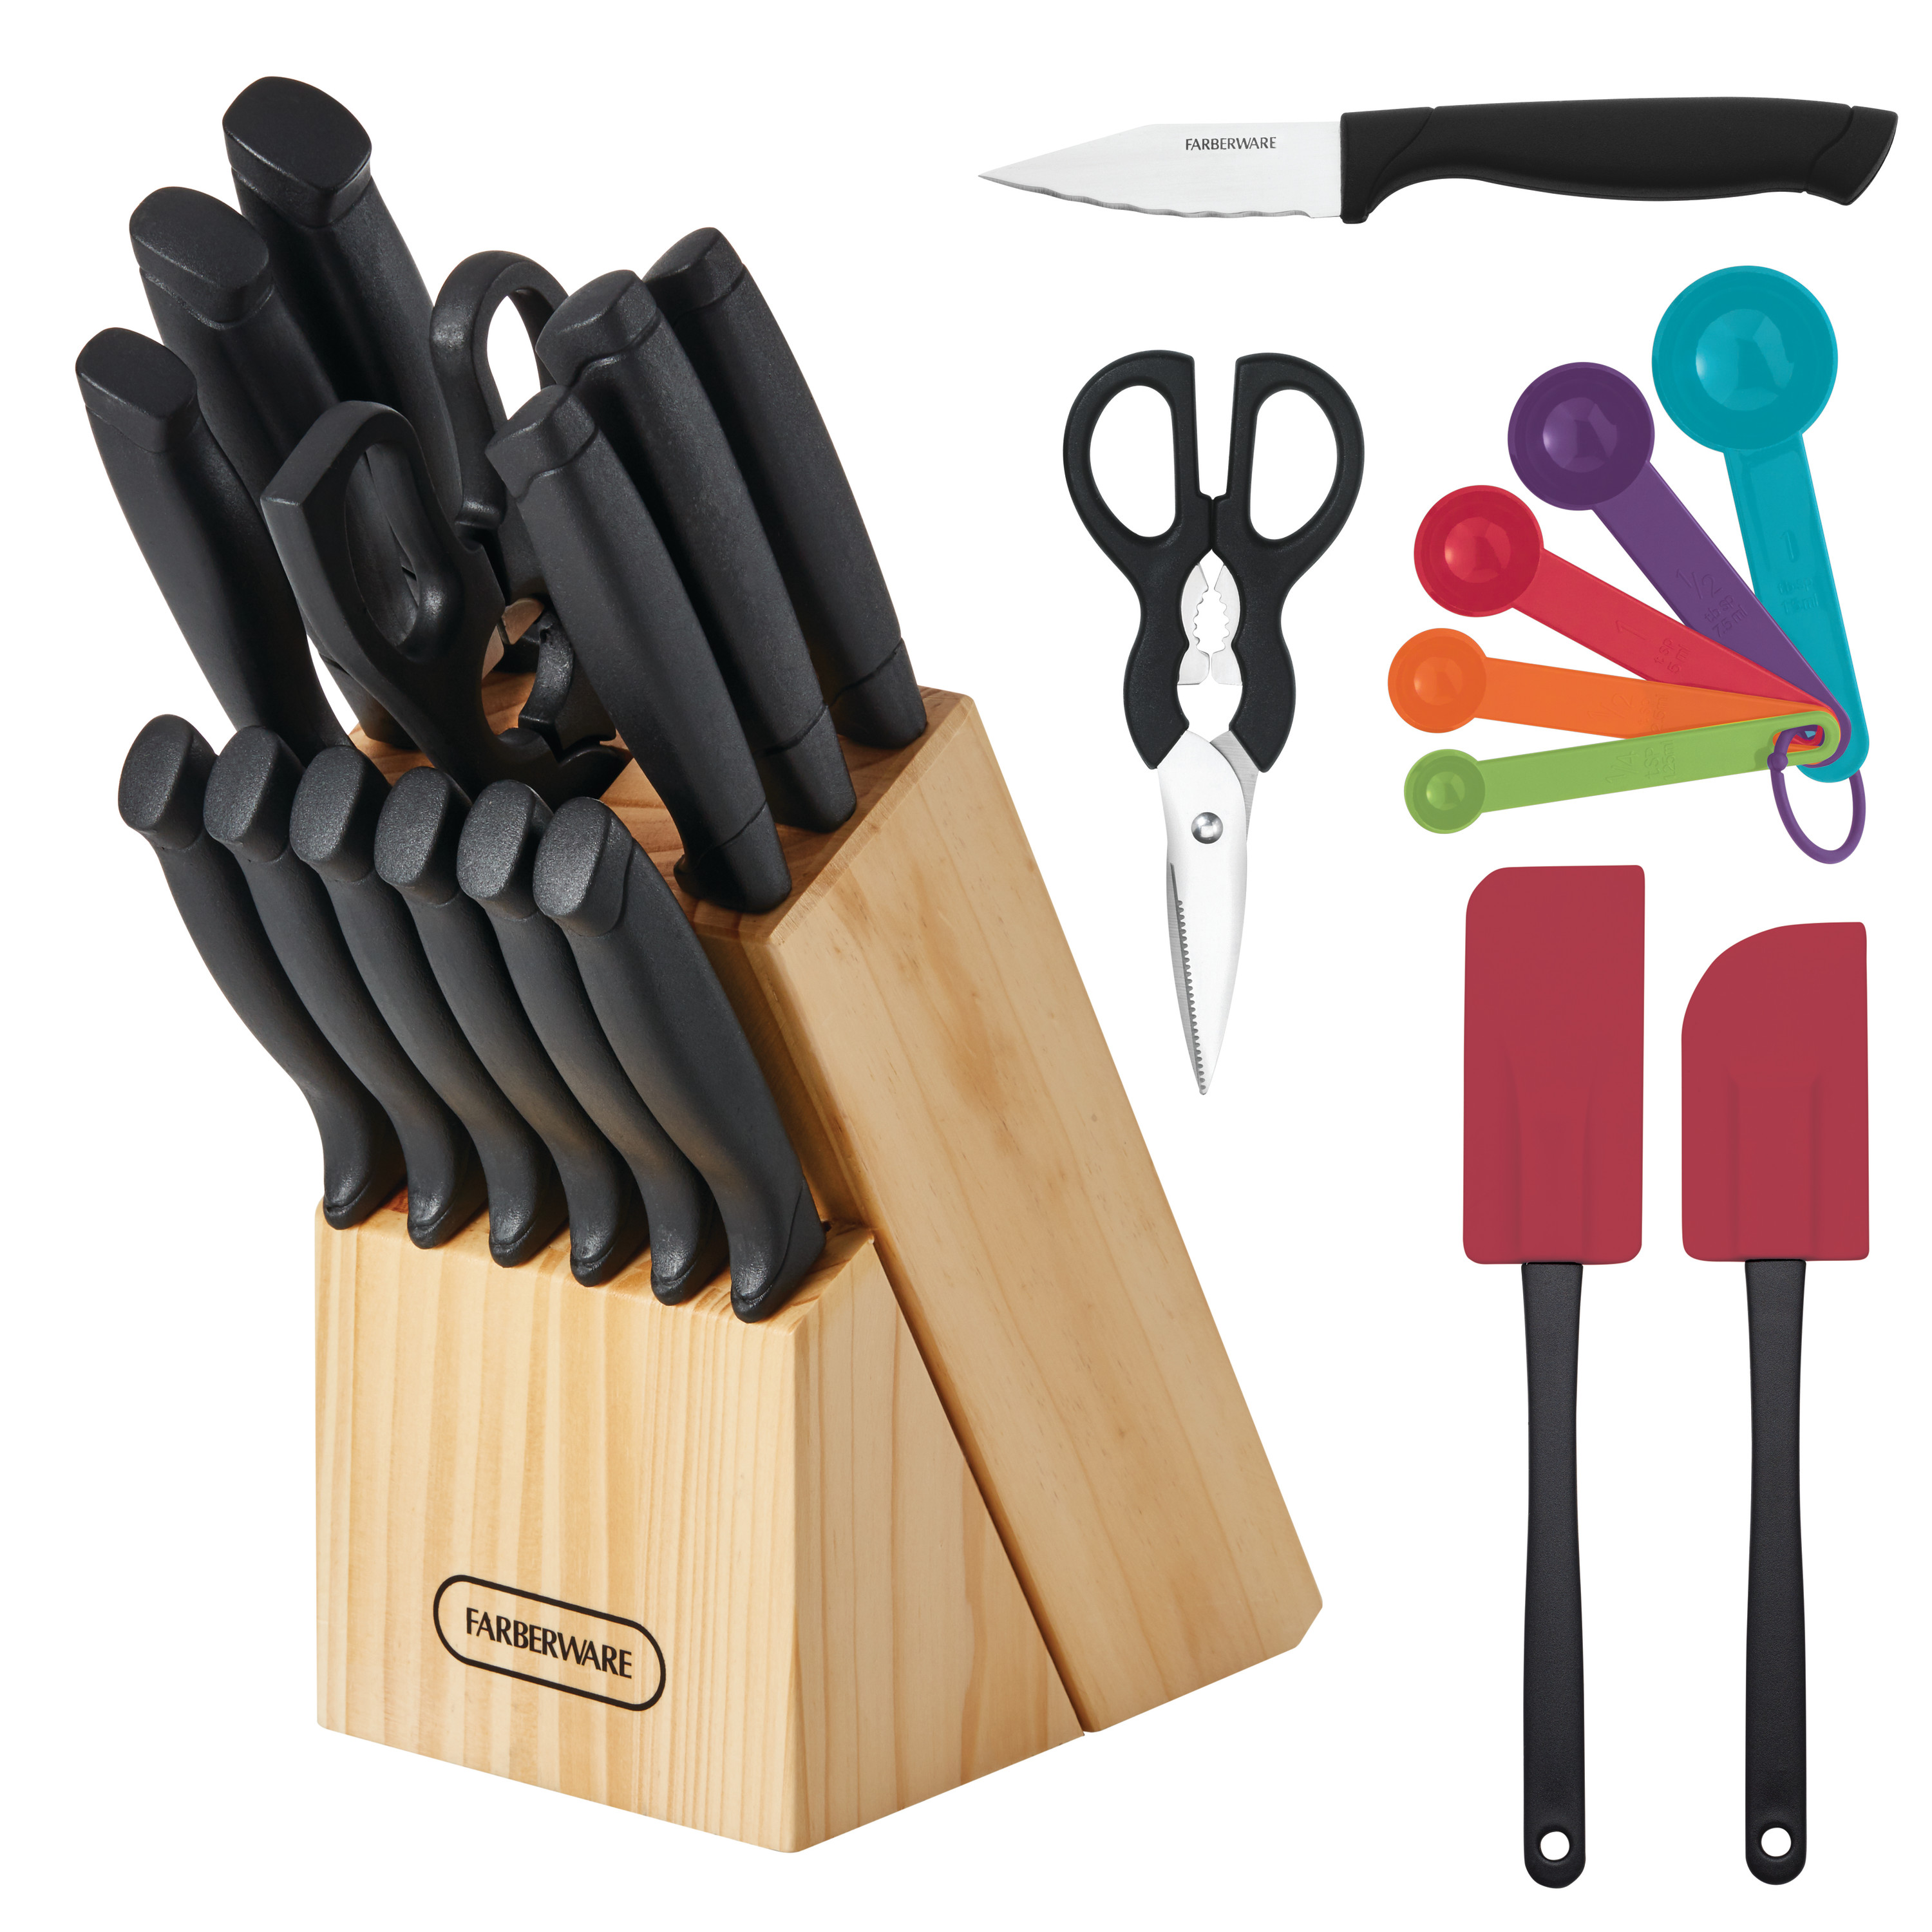 Farberware Classic 23 Piece Never Needs Sharpening Dishwasher Safe Stainless Steel Cutlery and Utensil Set in Black - image 1 of 23